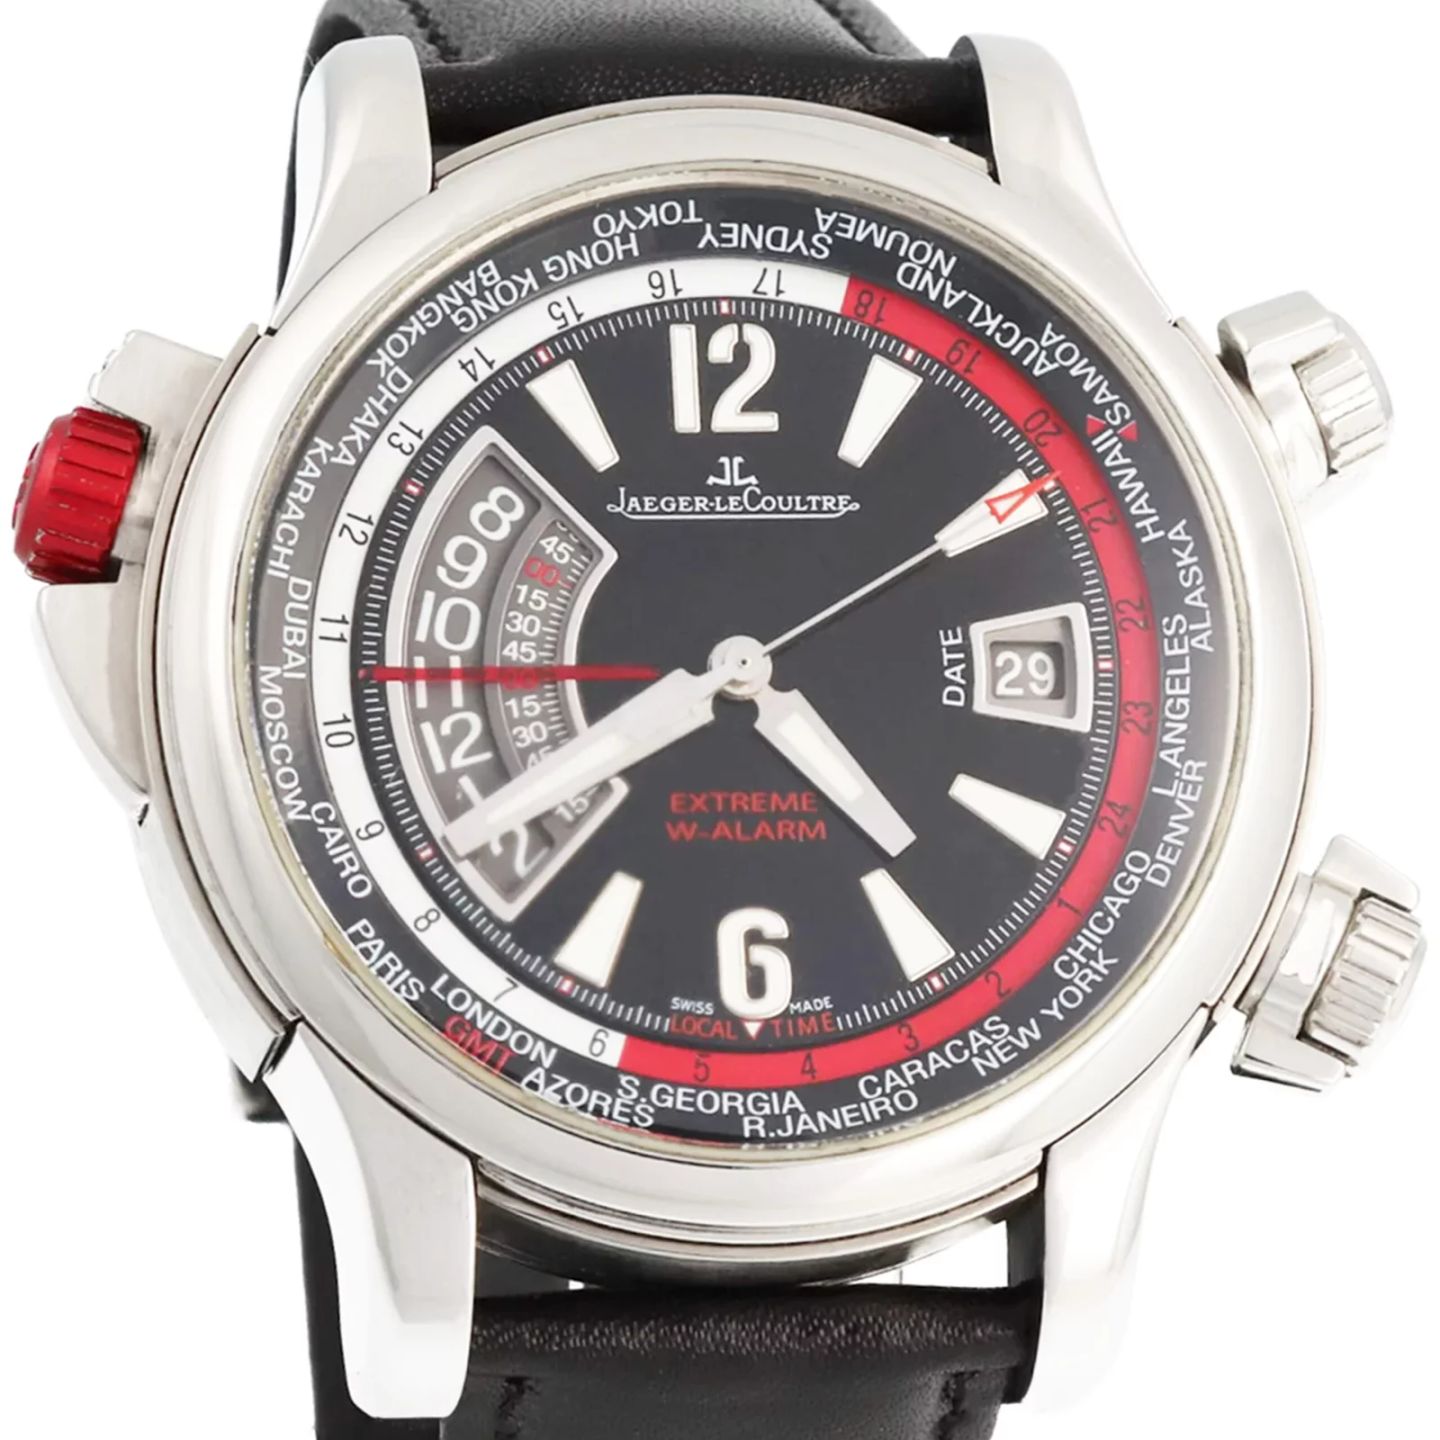 Jaeger-LeCoultre Master Compressor Extreme Q1778470 (Unknown (random serial)) - Black dial 46 mm Steel case (1/8)